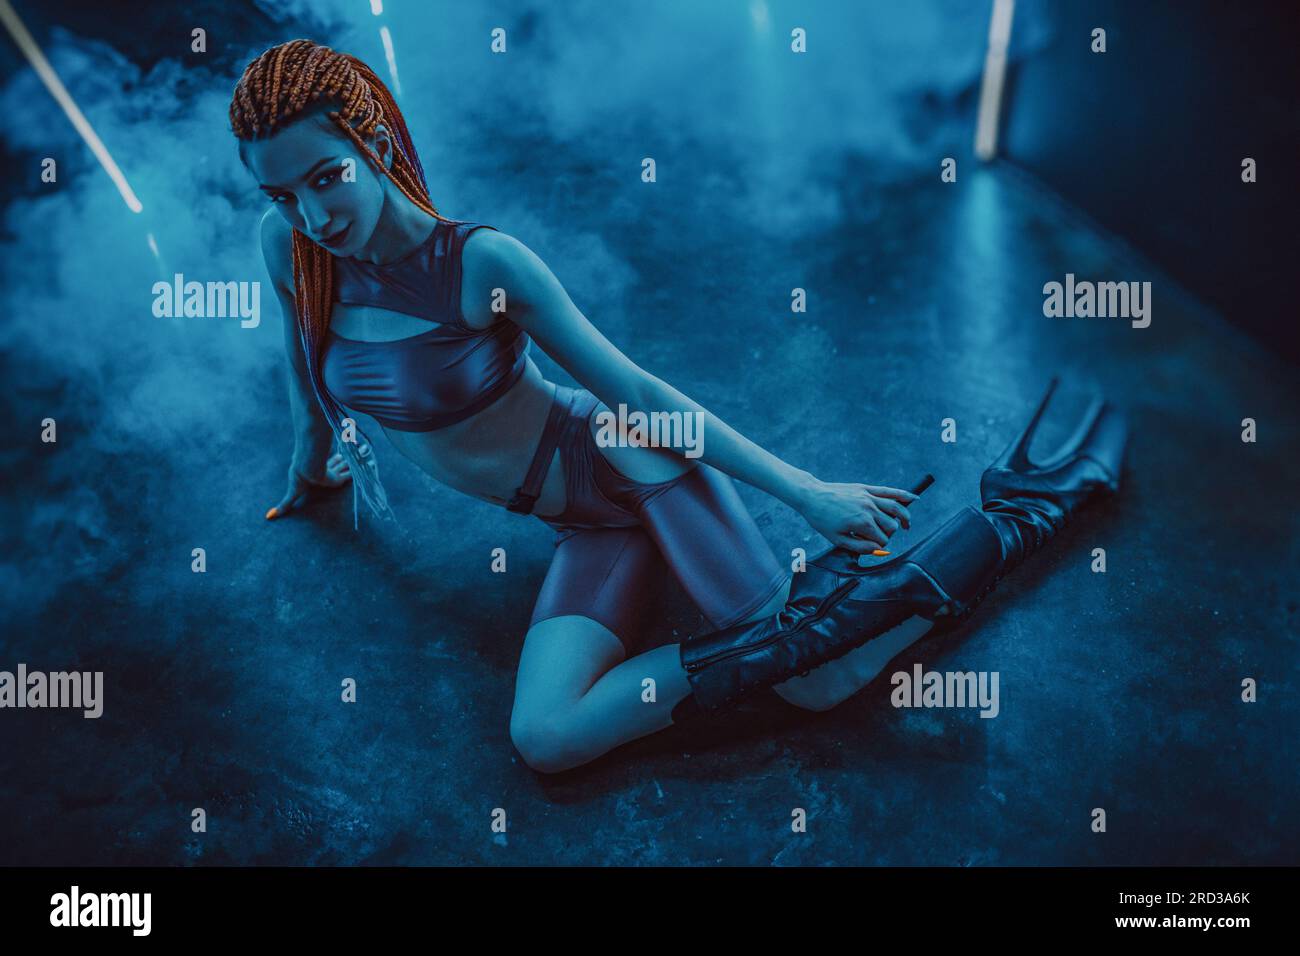 Young woman dancer posing in dark night club interior with blue lights and smoke Stock Photo